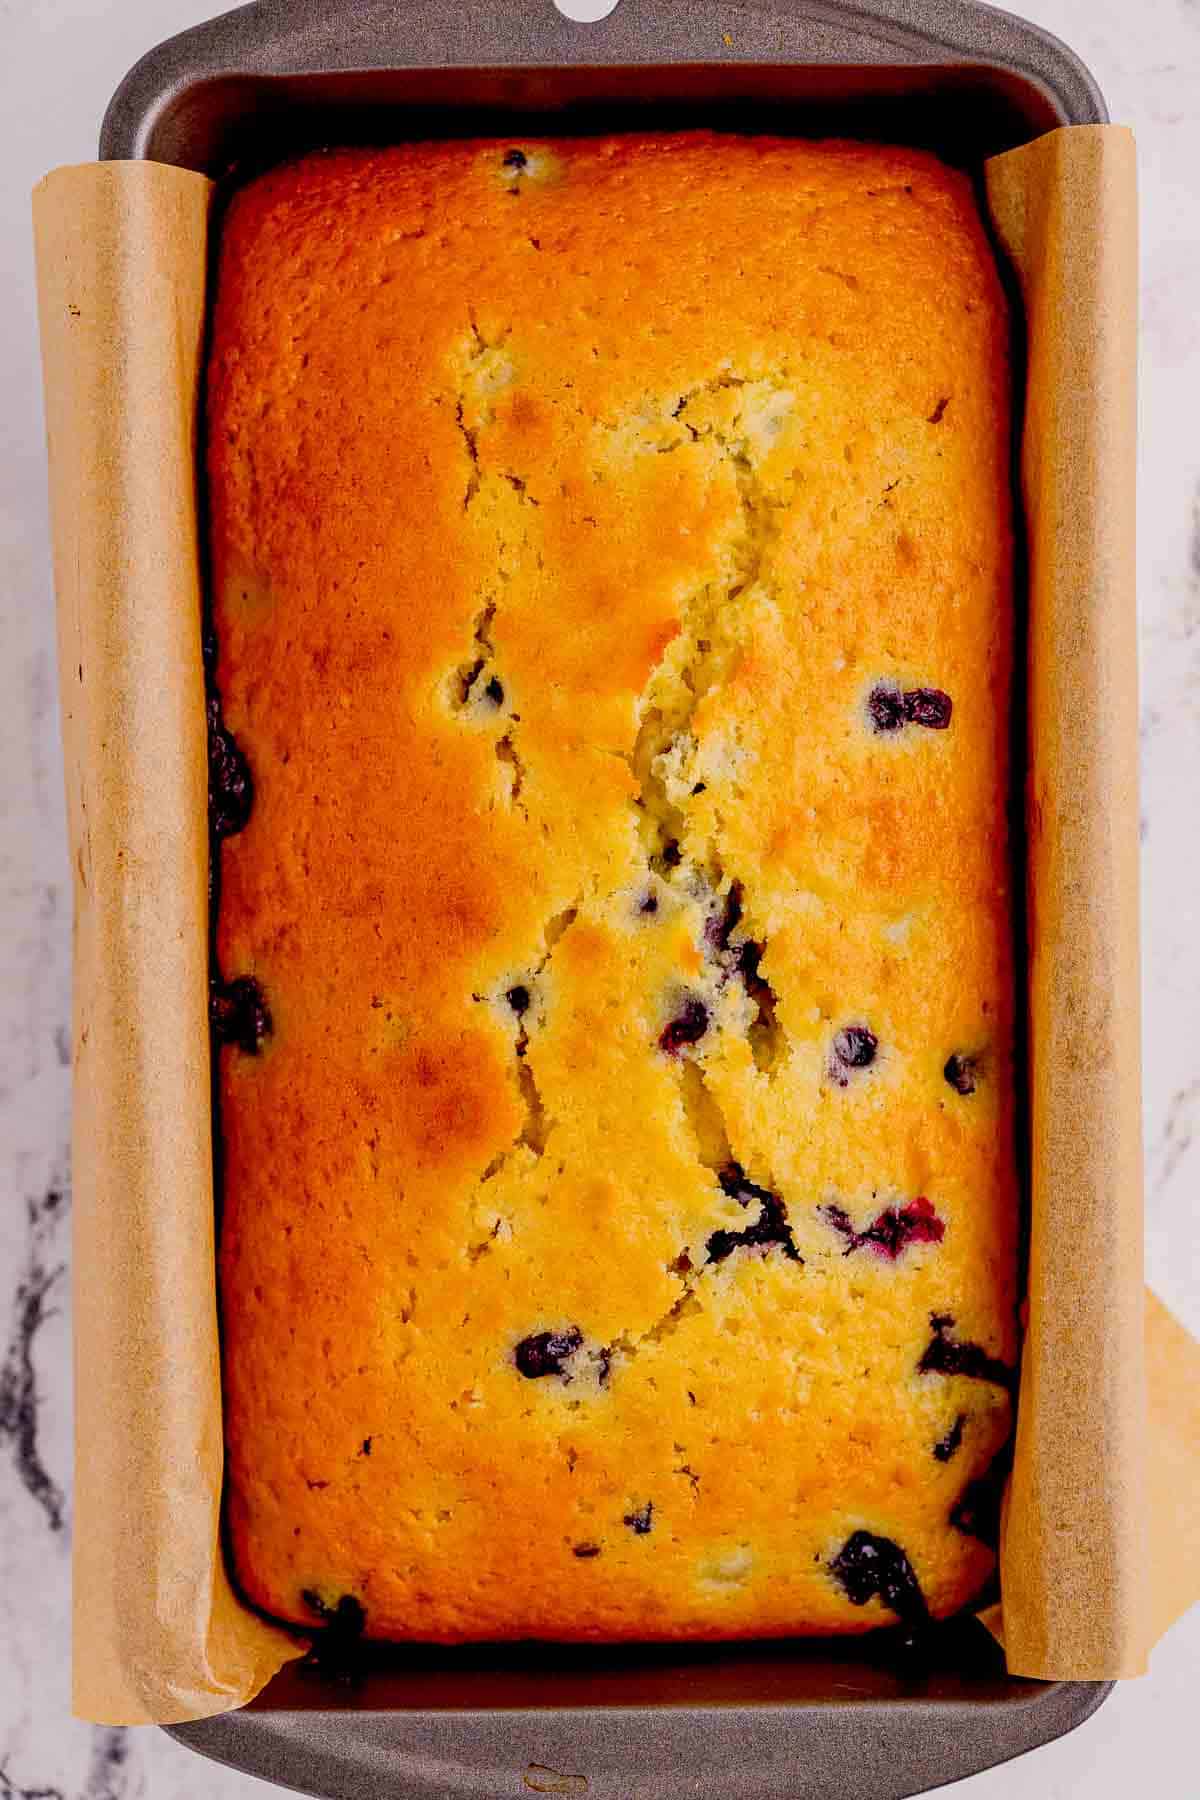 Lemon Blueberry Loaf is a delicious baked treat that combines the tangy flavor of lemons with the sweet burst of blueberries and is perfect for serving at brunch or as a dessert.